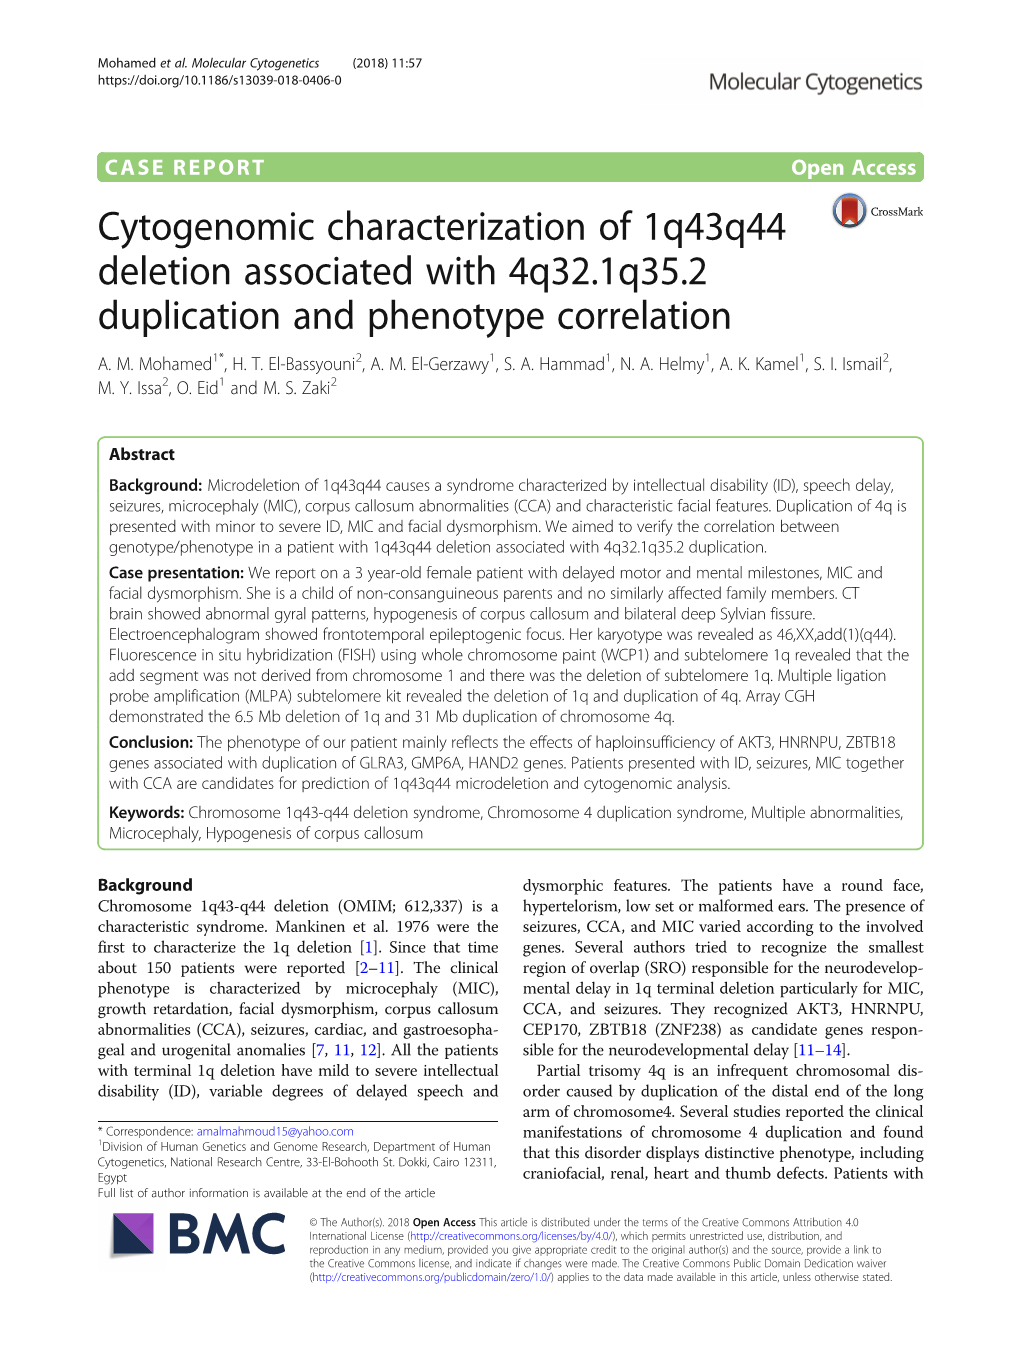 Cytogenomic Characterization of 1Q43q44 Deletion Associated with 4Q32.1Q35.2 Duplication and Phenotype Correlation A